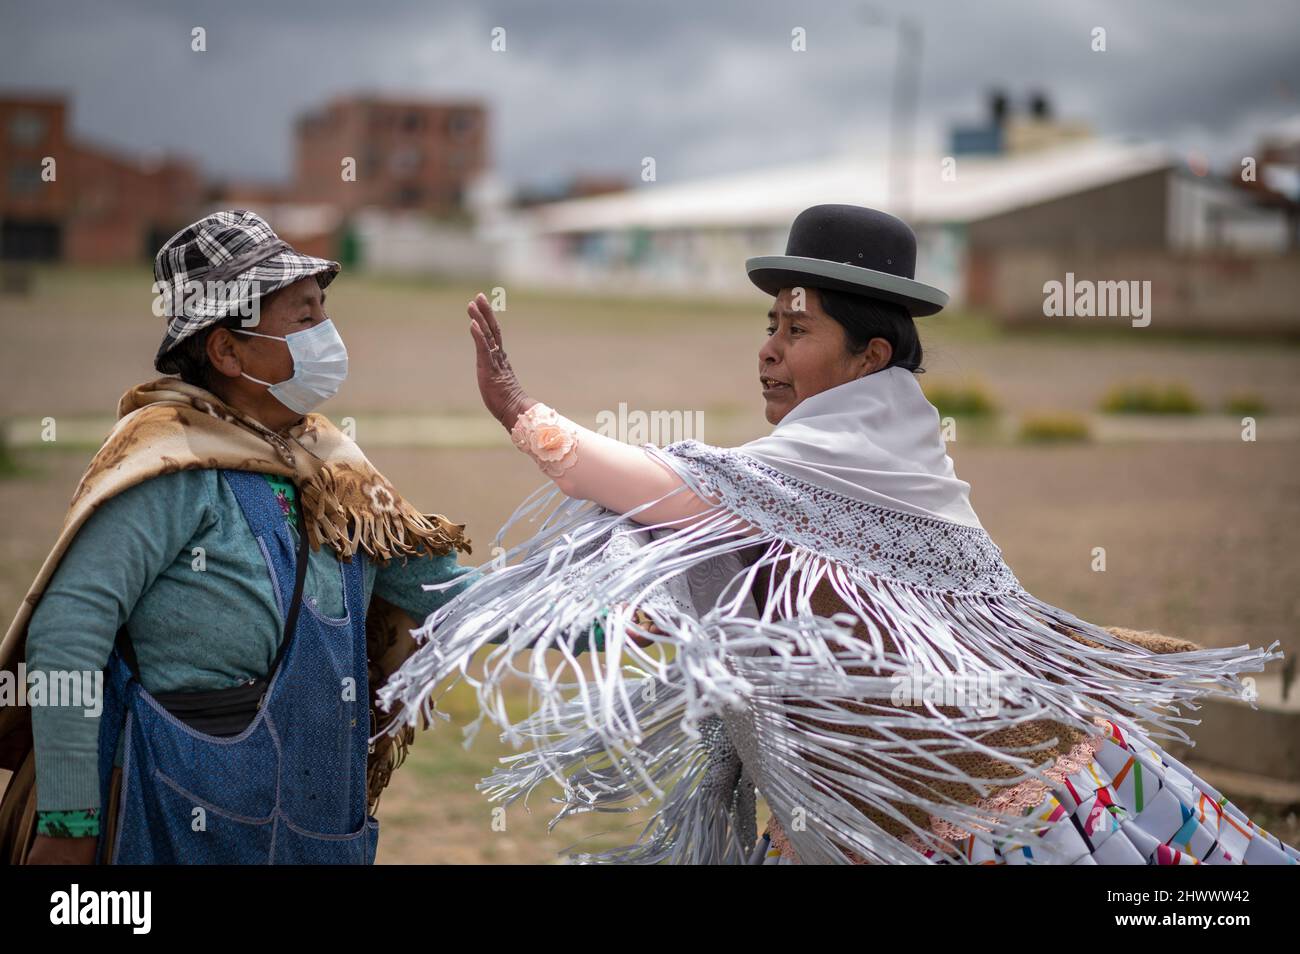 El Alto, Bolivia. 18th Feb, 2022. Lidia Maytia (r) shows a participant (l) self-defense exercises during a workshop of the project 'Warmi Power' (women's power). Ramos, a psychologist and taekwondo athlete, created this project with the goal of giving 'women means to prevent violence or fight back.' 'Violence against women is often normalized as part of the culture,' Ramos says. 'Violence is not solved by violence. But it can save someone's life.' (to dpa ''Warmi Power' in Bolivia: Indigenous women fight violence') Credit: Radoslaw Czajkowski//dpa/Alamy Live News Stock Photo